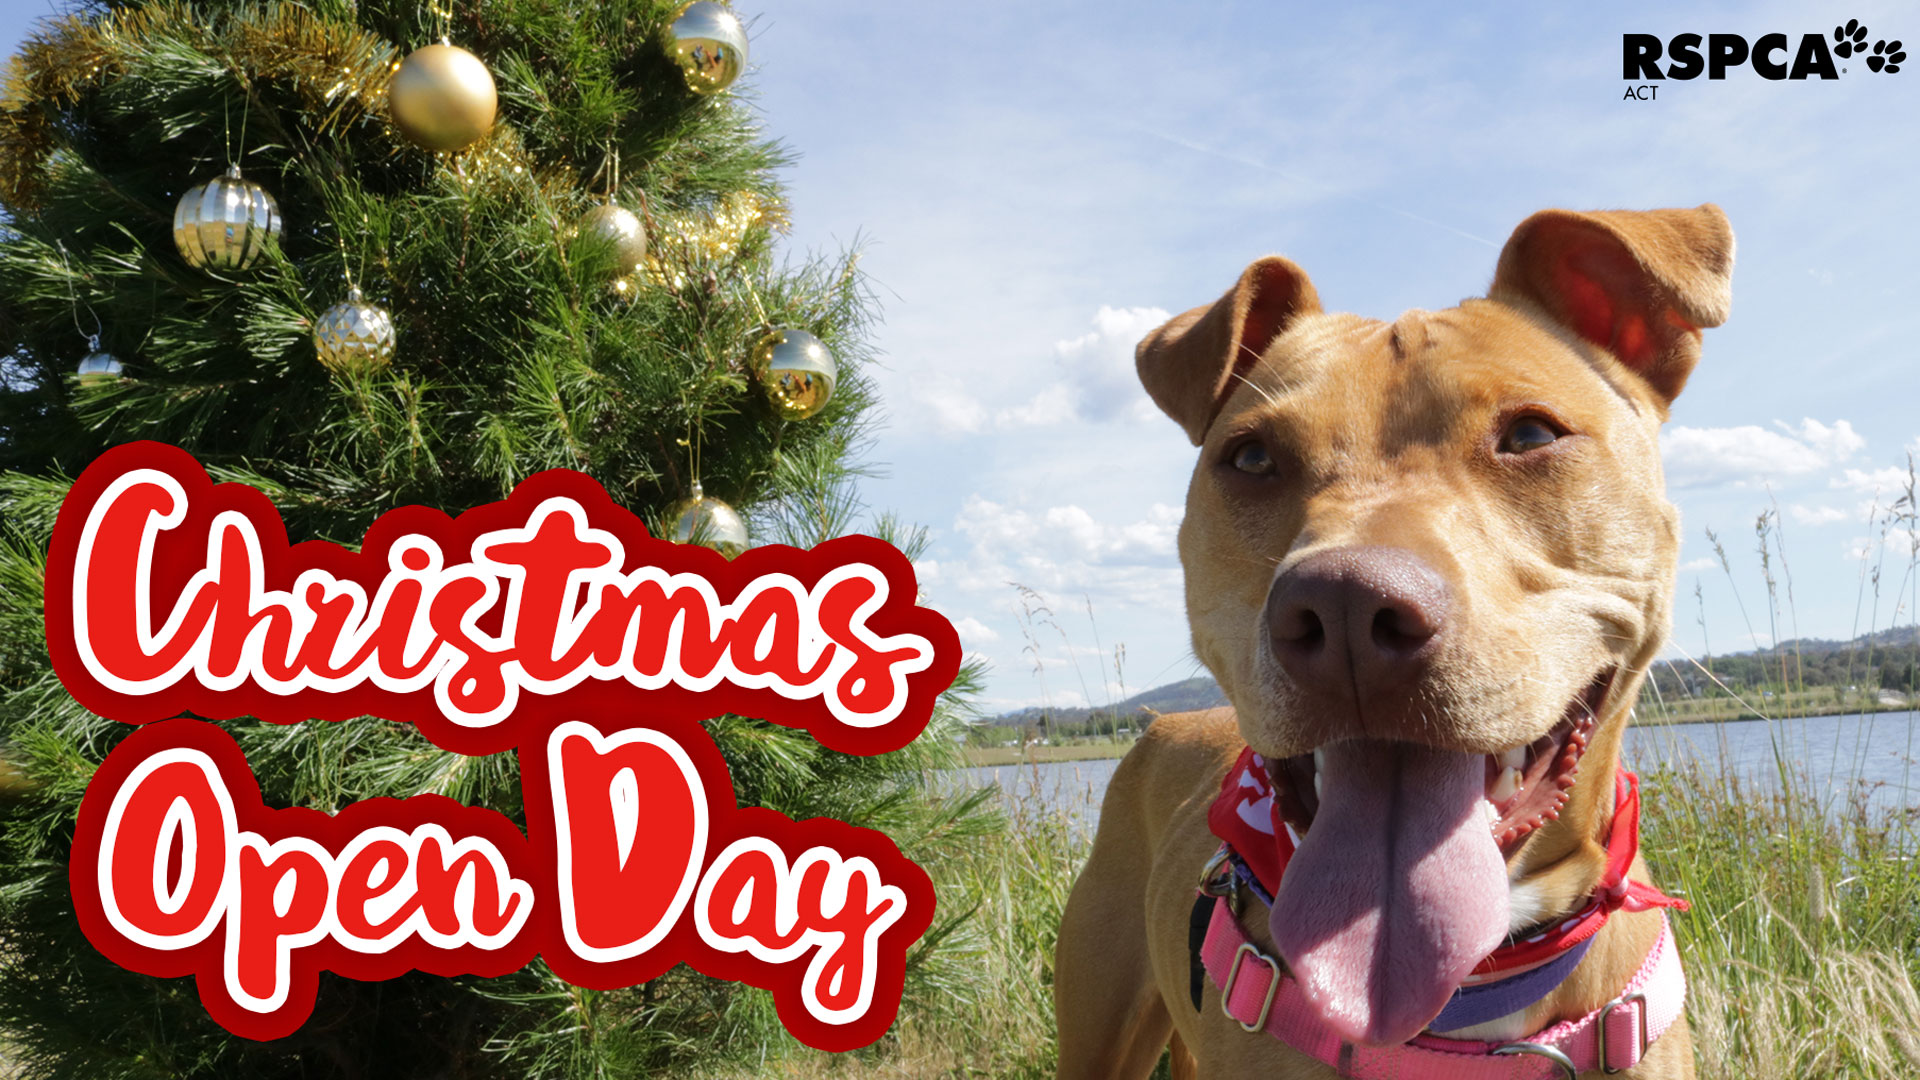 RSPCA ACT Christmas Open Day!